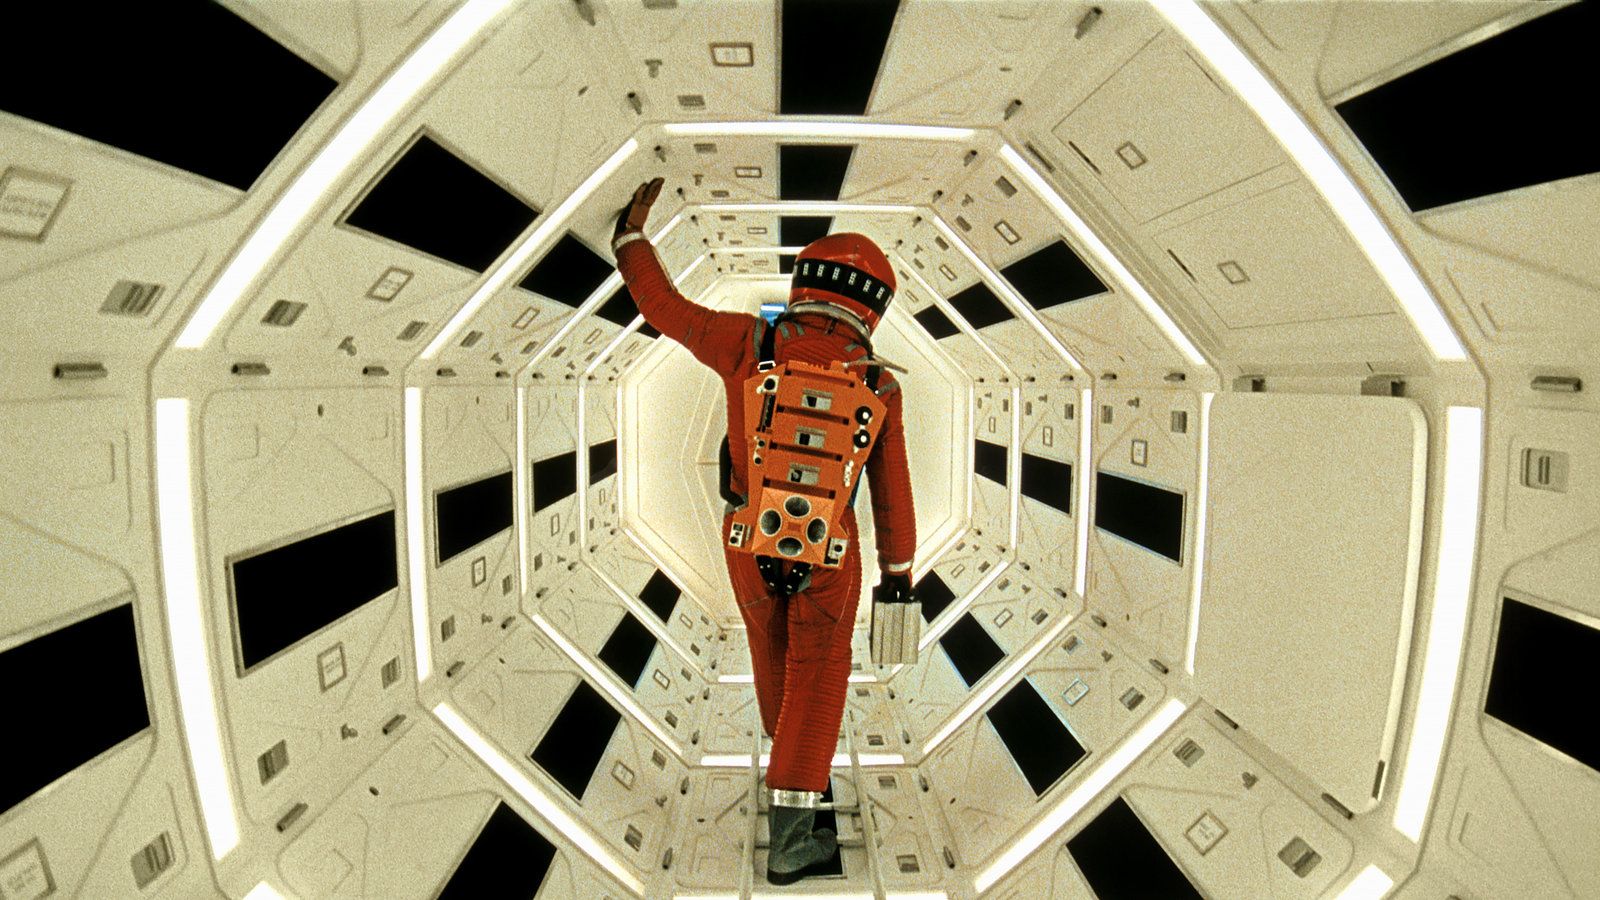 The Making of '2001: A Space Odyssey' Was as Far Out as the Movie